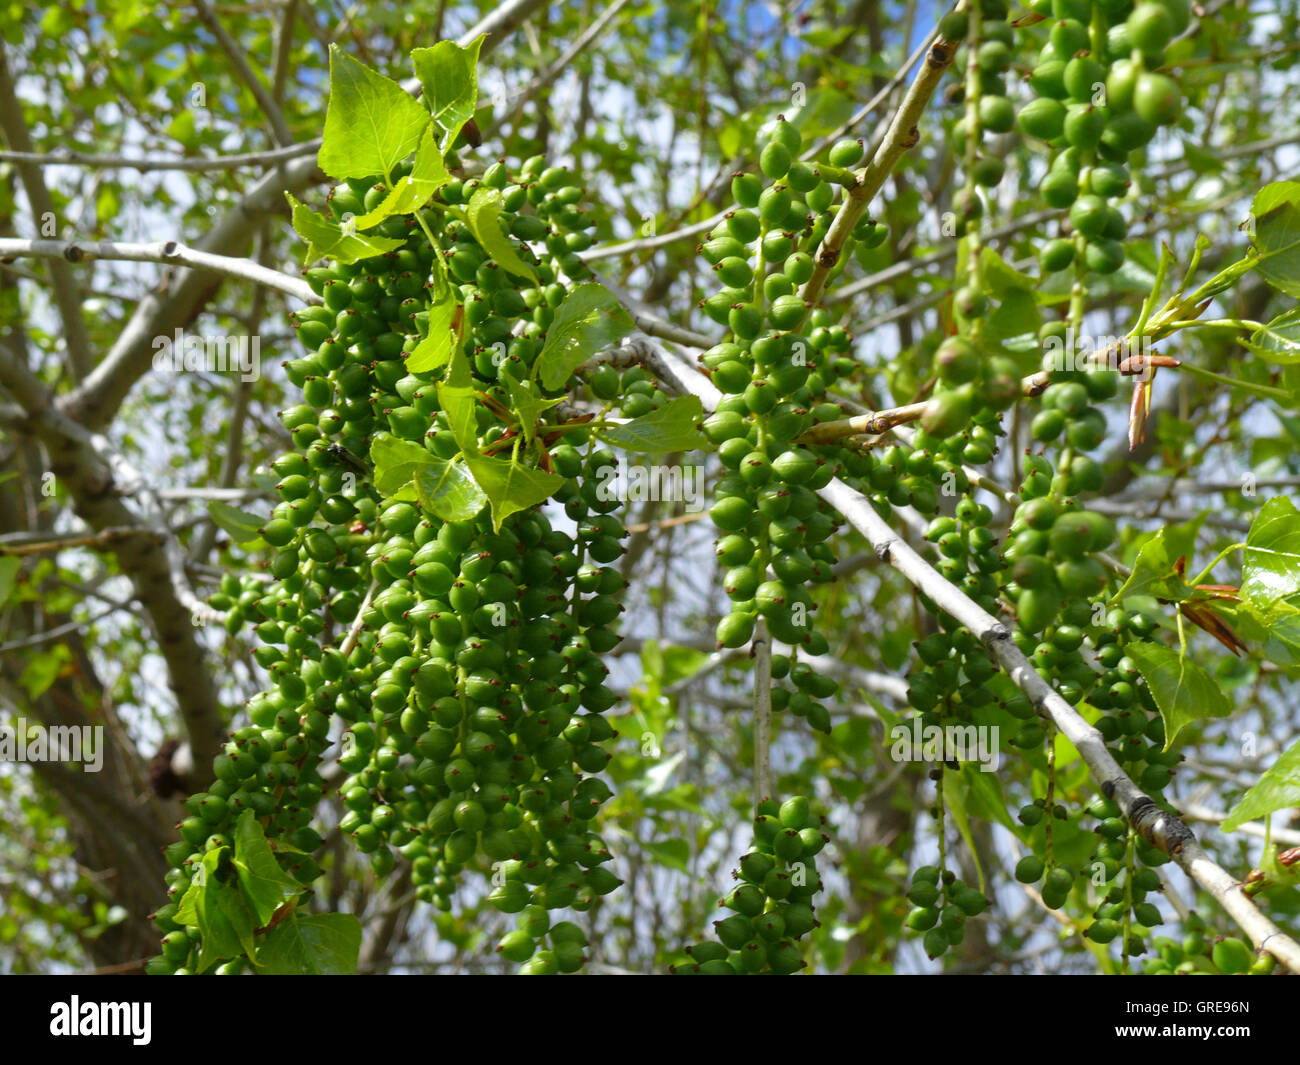 Tropical And Subtropical Tree With Green Infructescence Stock Photo